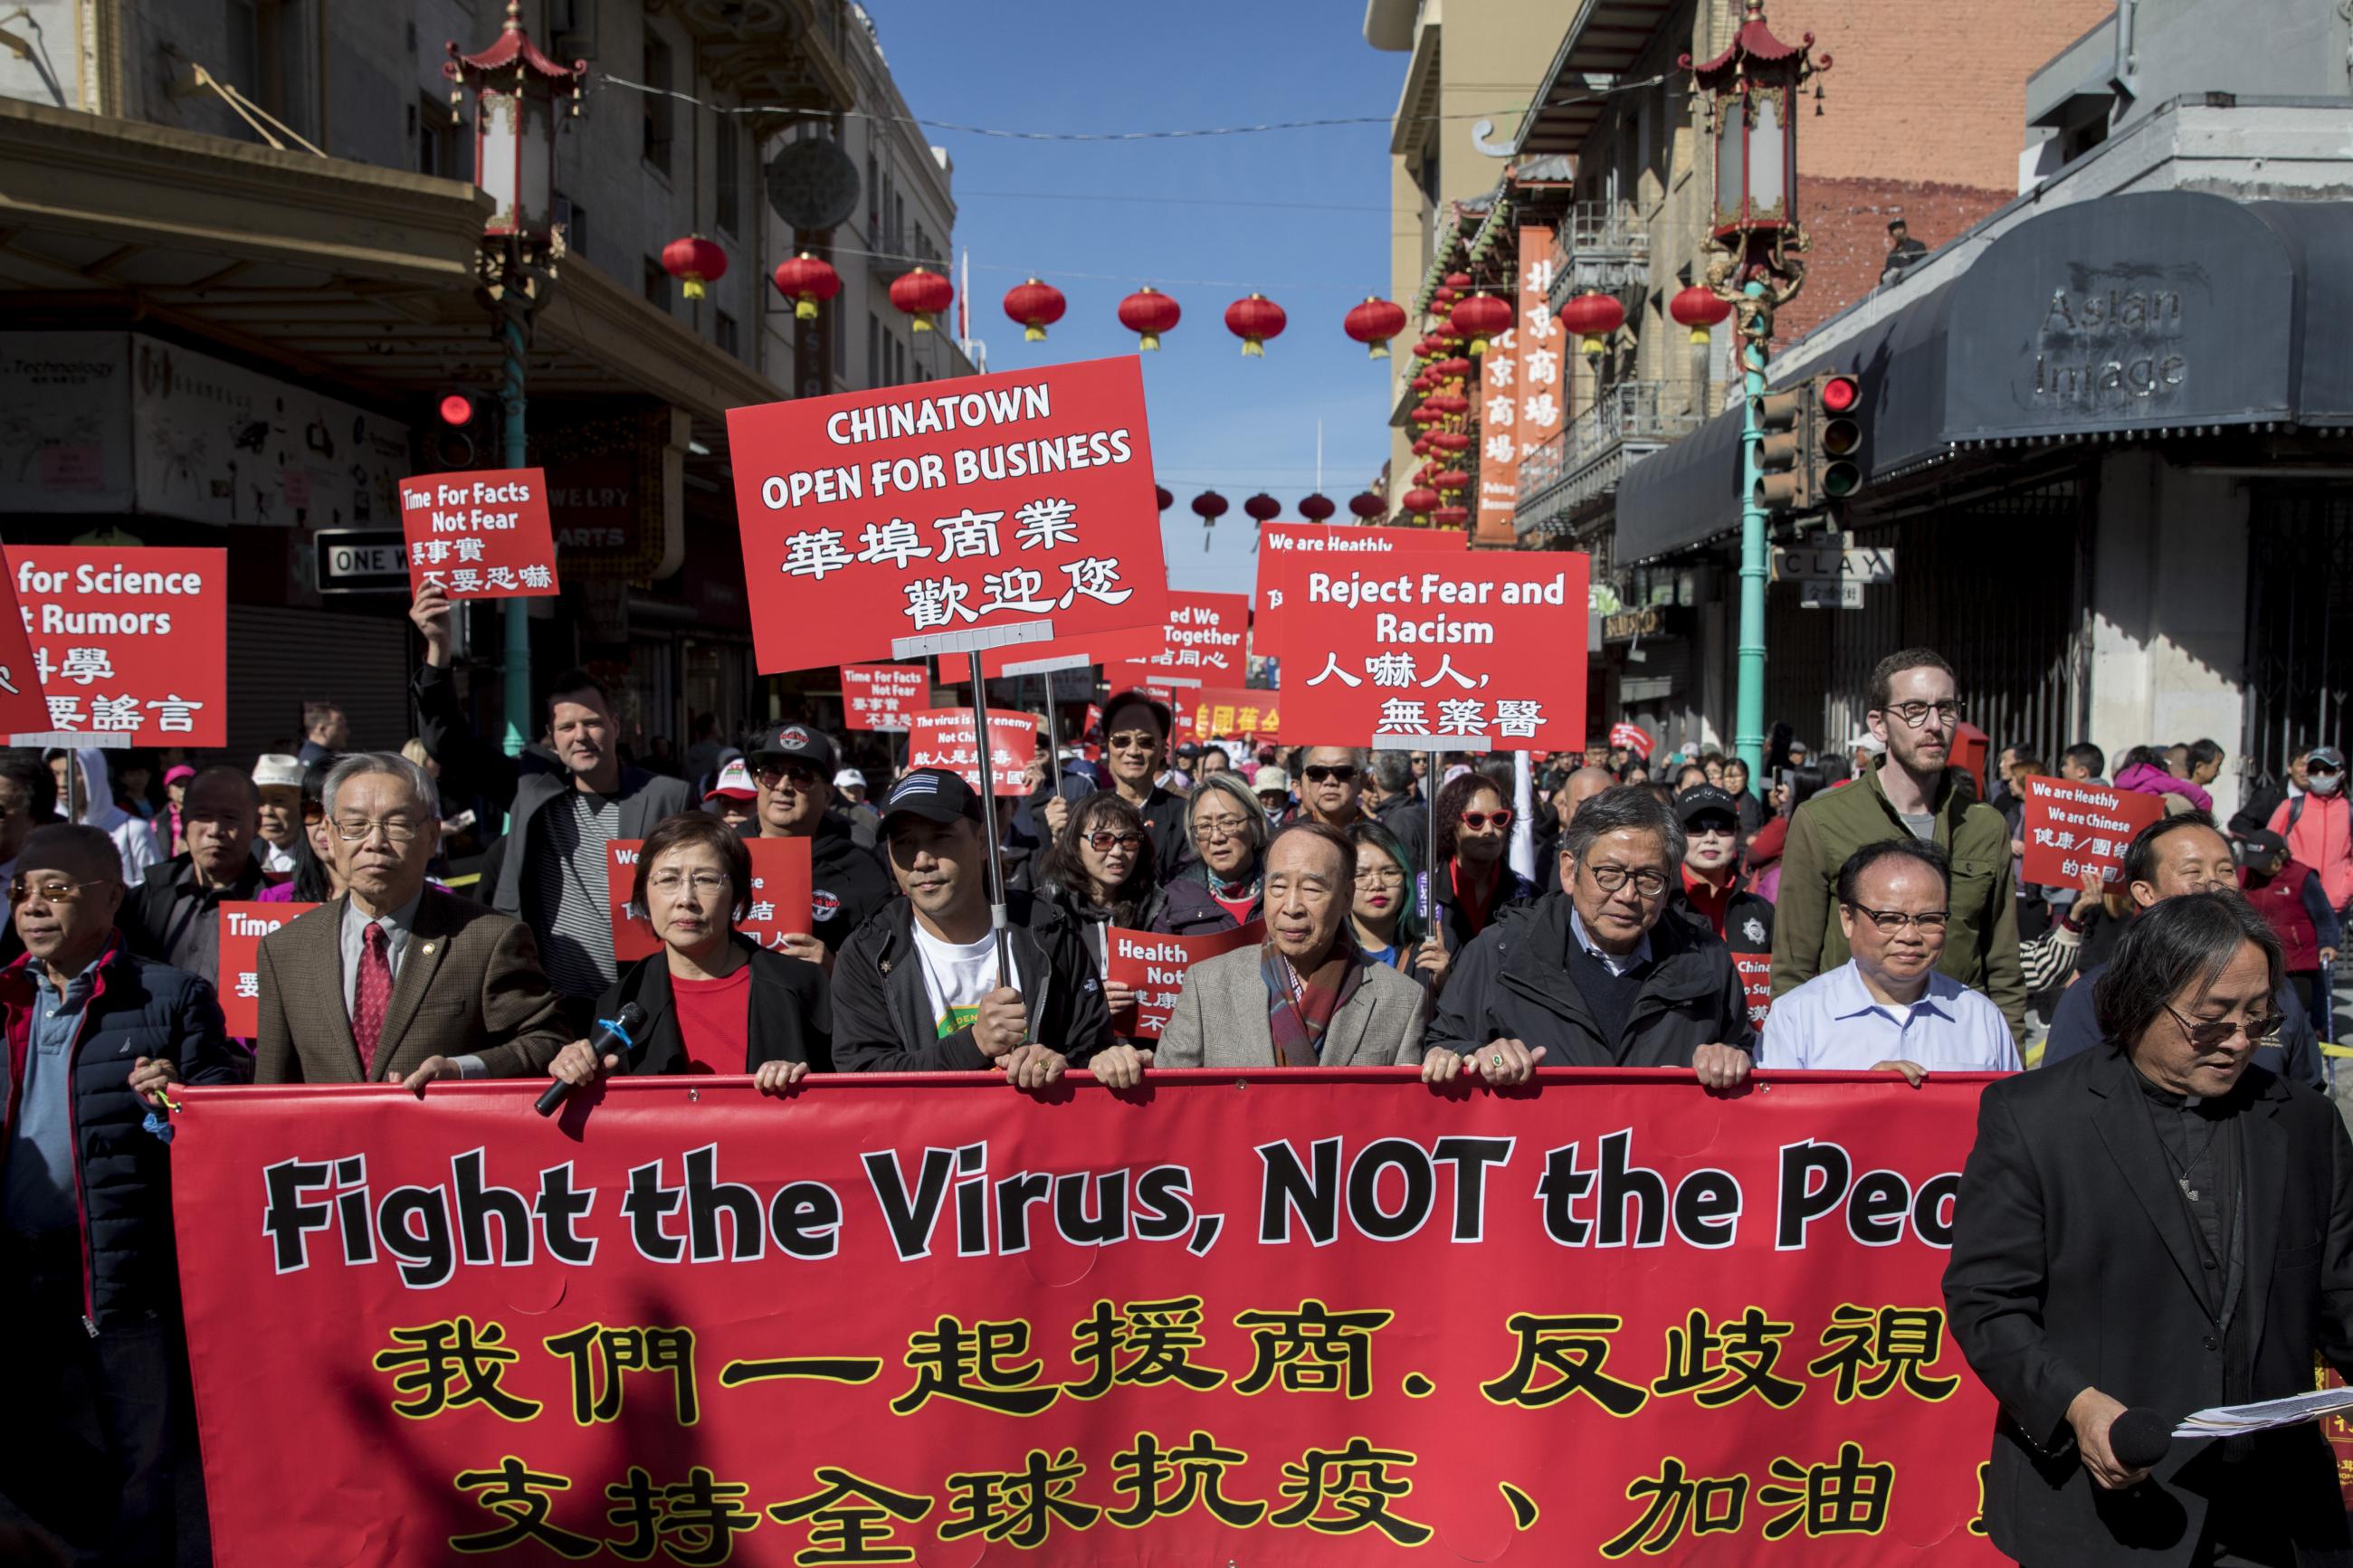 Hundreds of Chinatown residents along with local and state officials take to the streets protest against racism against the Chinese community during a march down Grant Avenue from Chinatown's Portsmouth Square to Union Square in San Francisco, Calif. Saturday, February 29, 2020. 